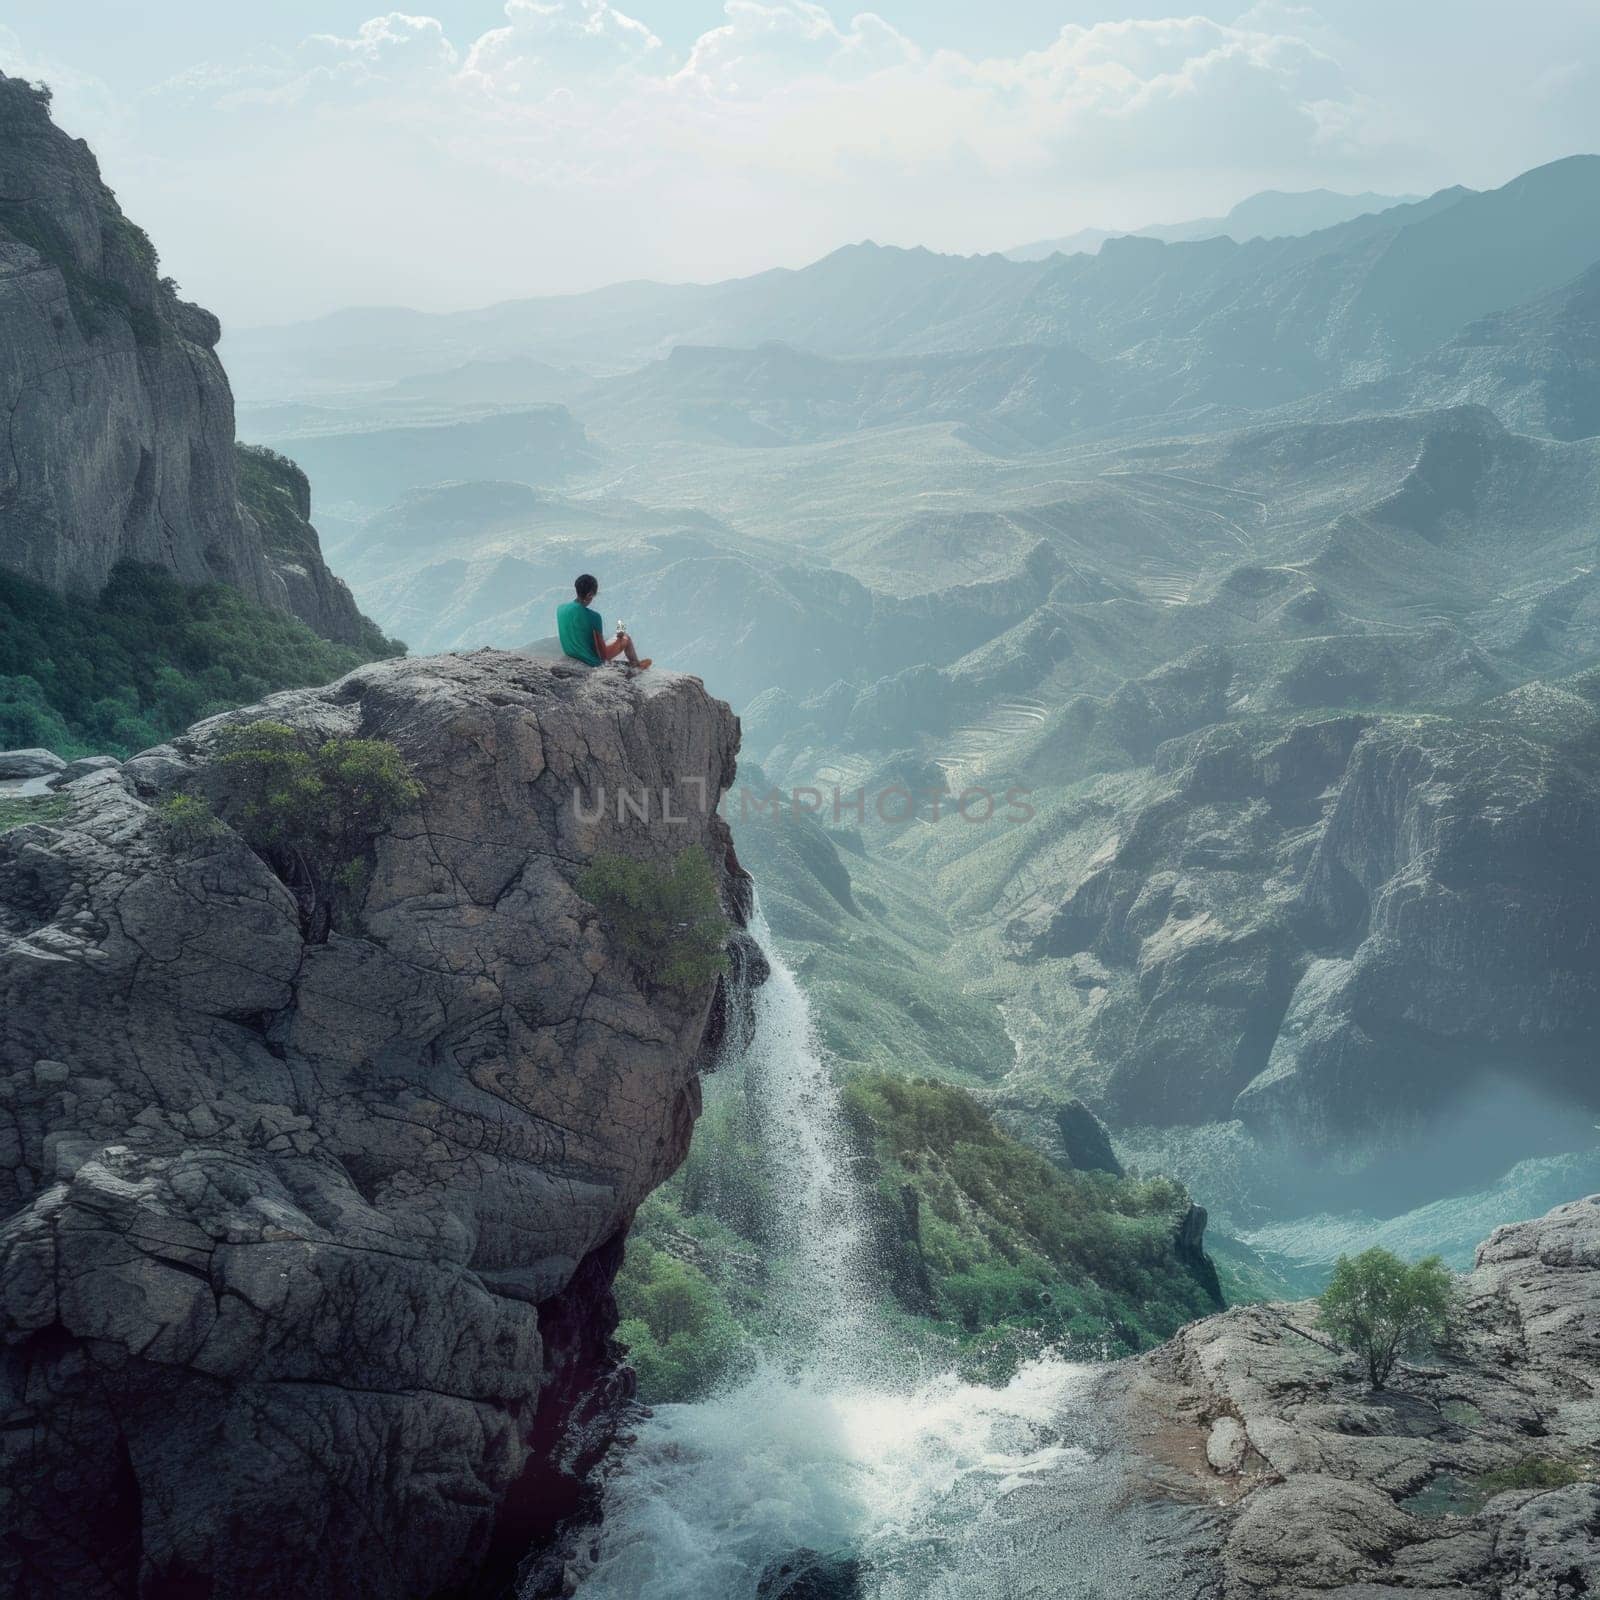 Two Asian people sit on top of a cliff, enjoying the view of a majestic waterfall while holding bottles.